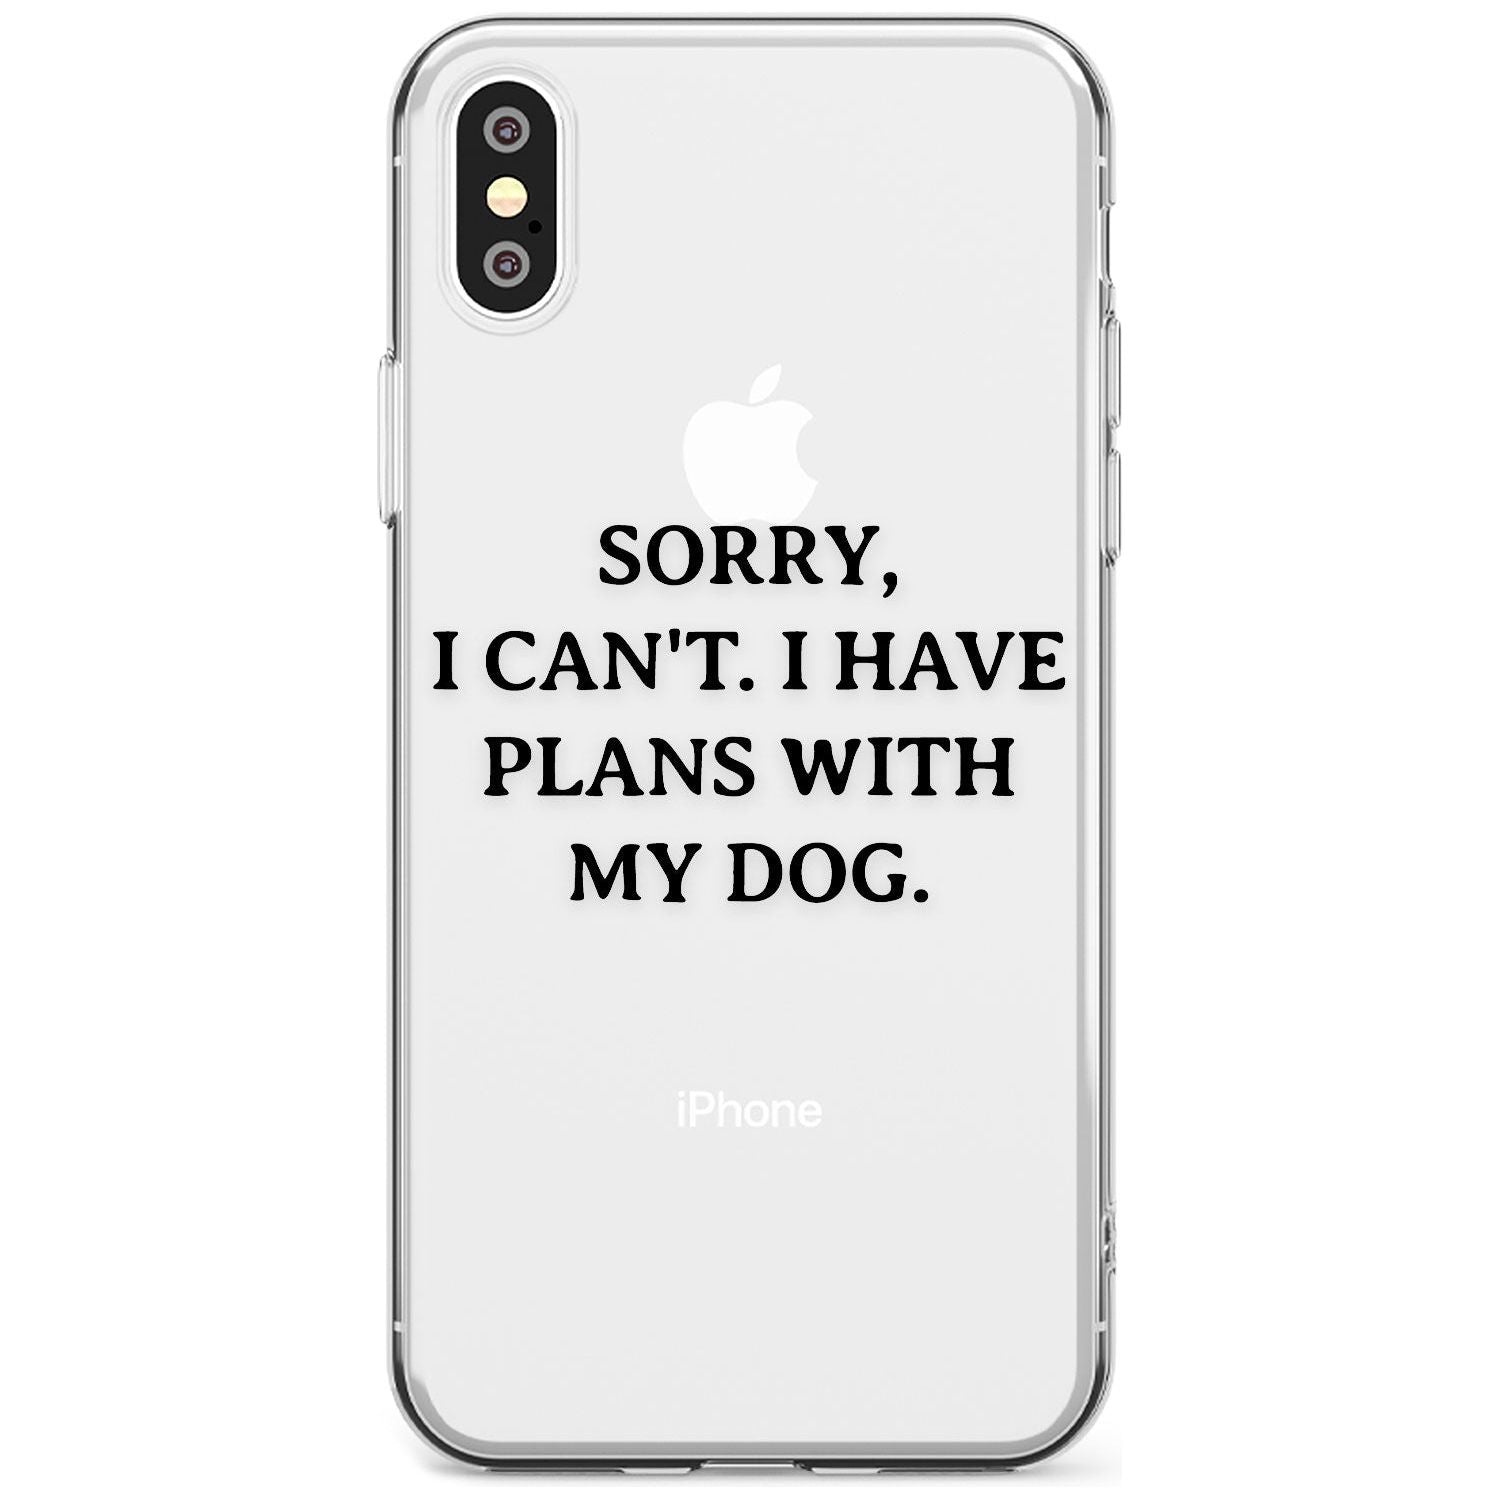 Plans with Dog Slim TPU Phone Case Warehouse X XS Max XR